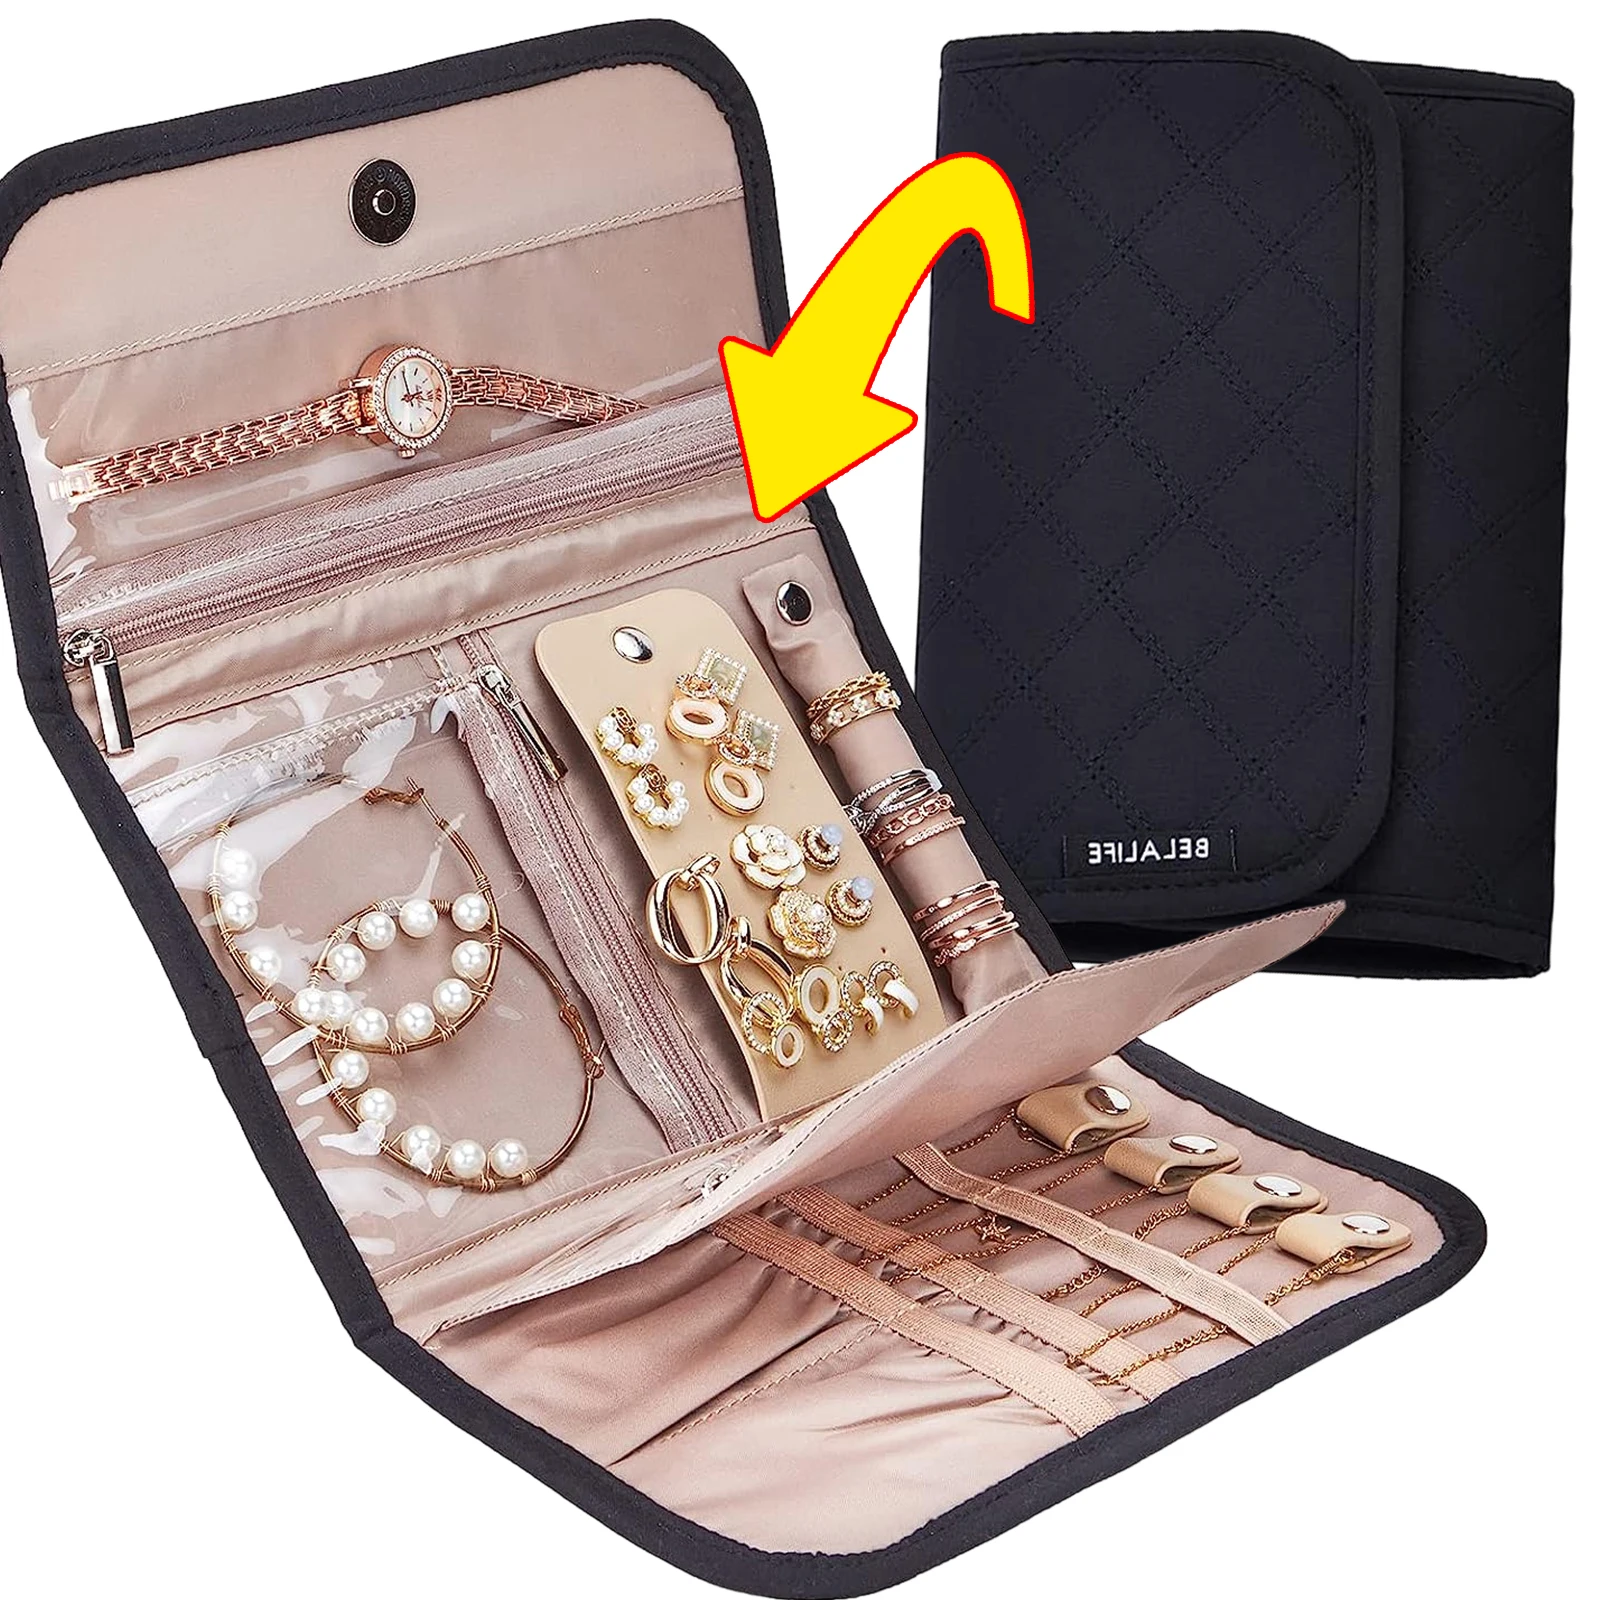 Roll Foldable Jewelry Case Travel Jewelry Organizer Portable for Journey Earrings Rings Diamond Necklaces Brooches Storage Bag mini jewelry storage box rings earrings bracelets travel portable bracelets jewelry gift packaging jewelry storage box new